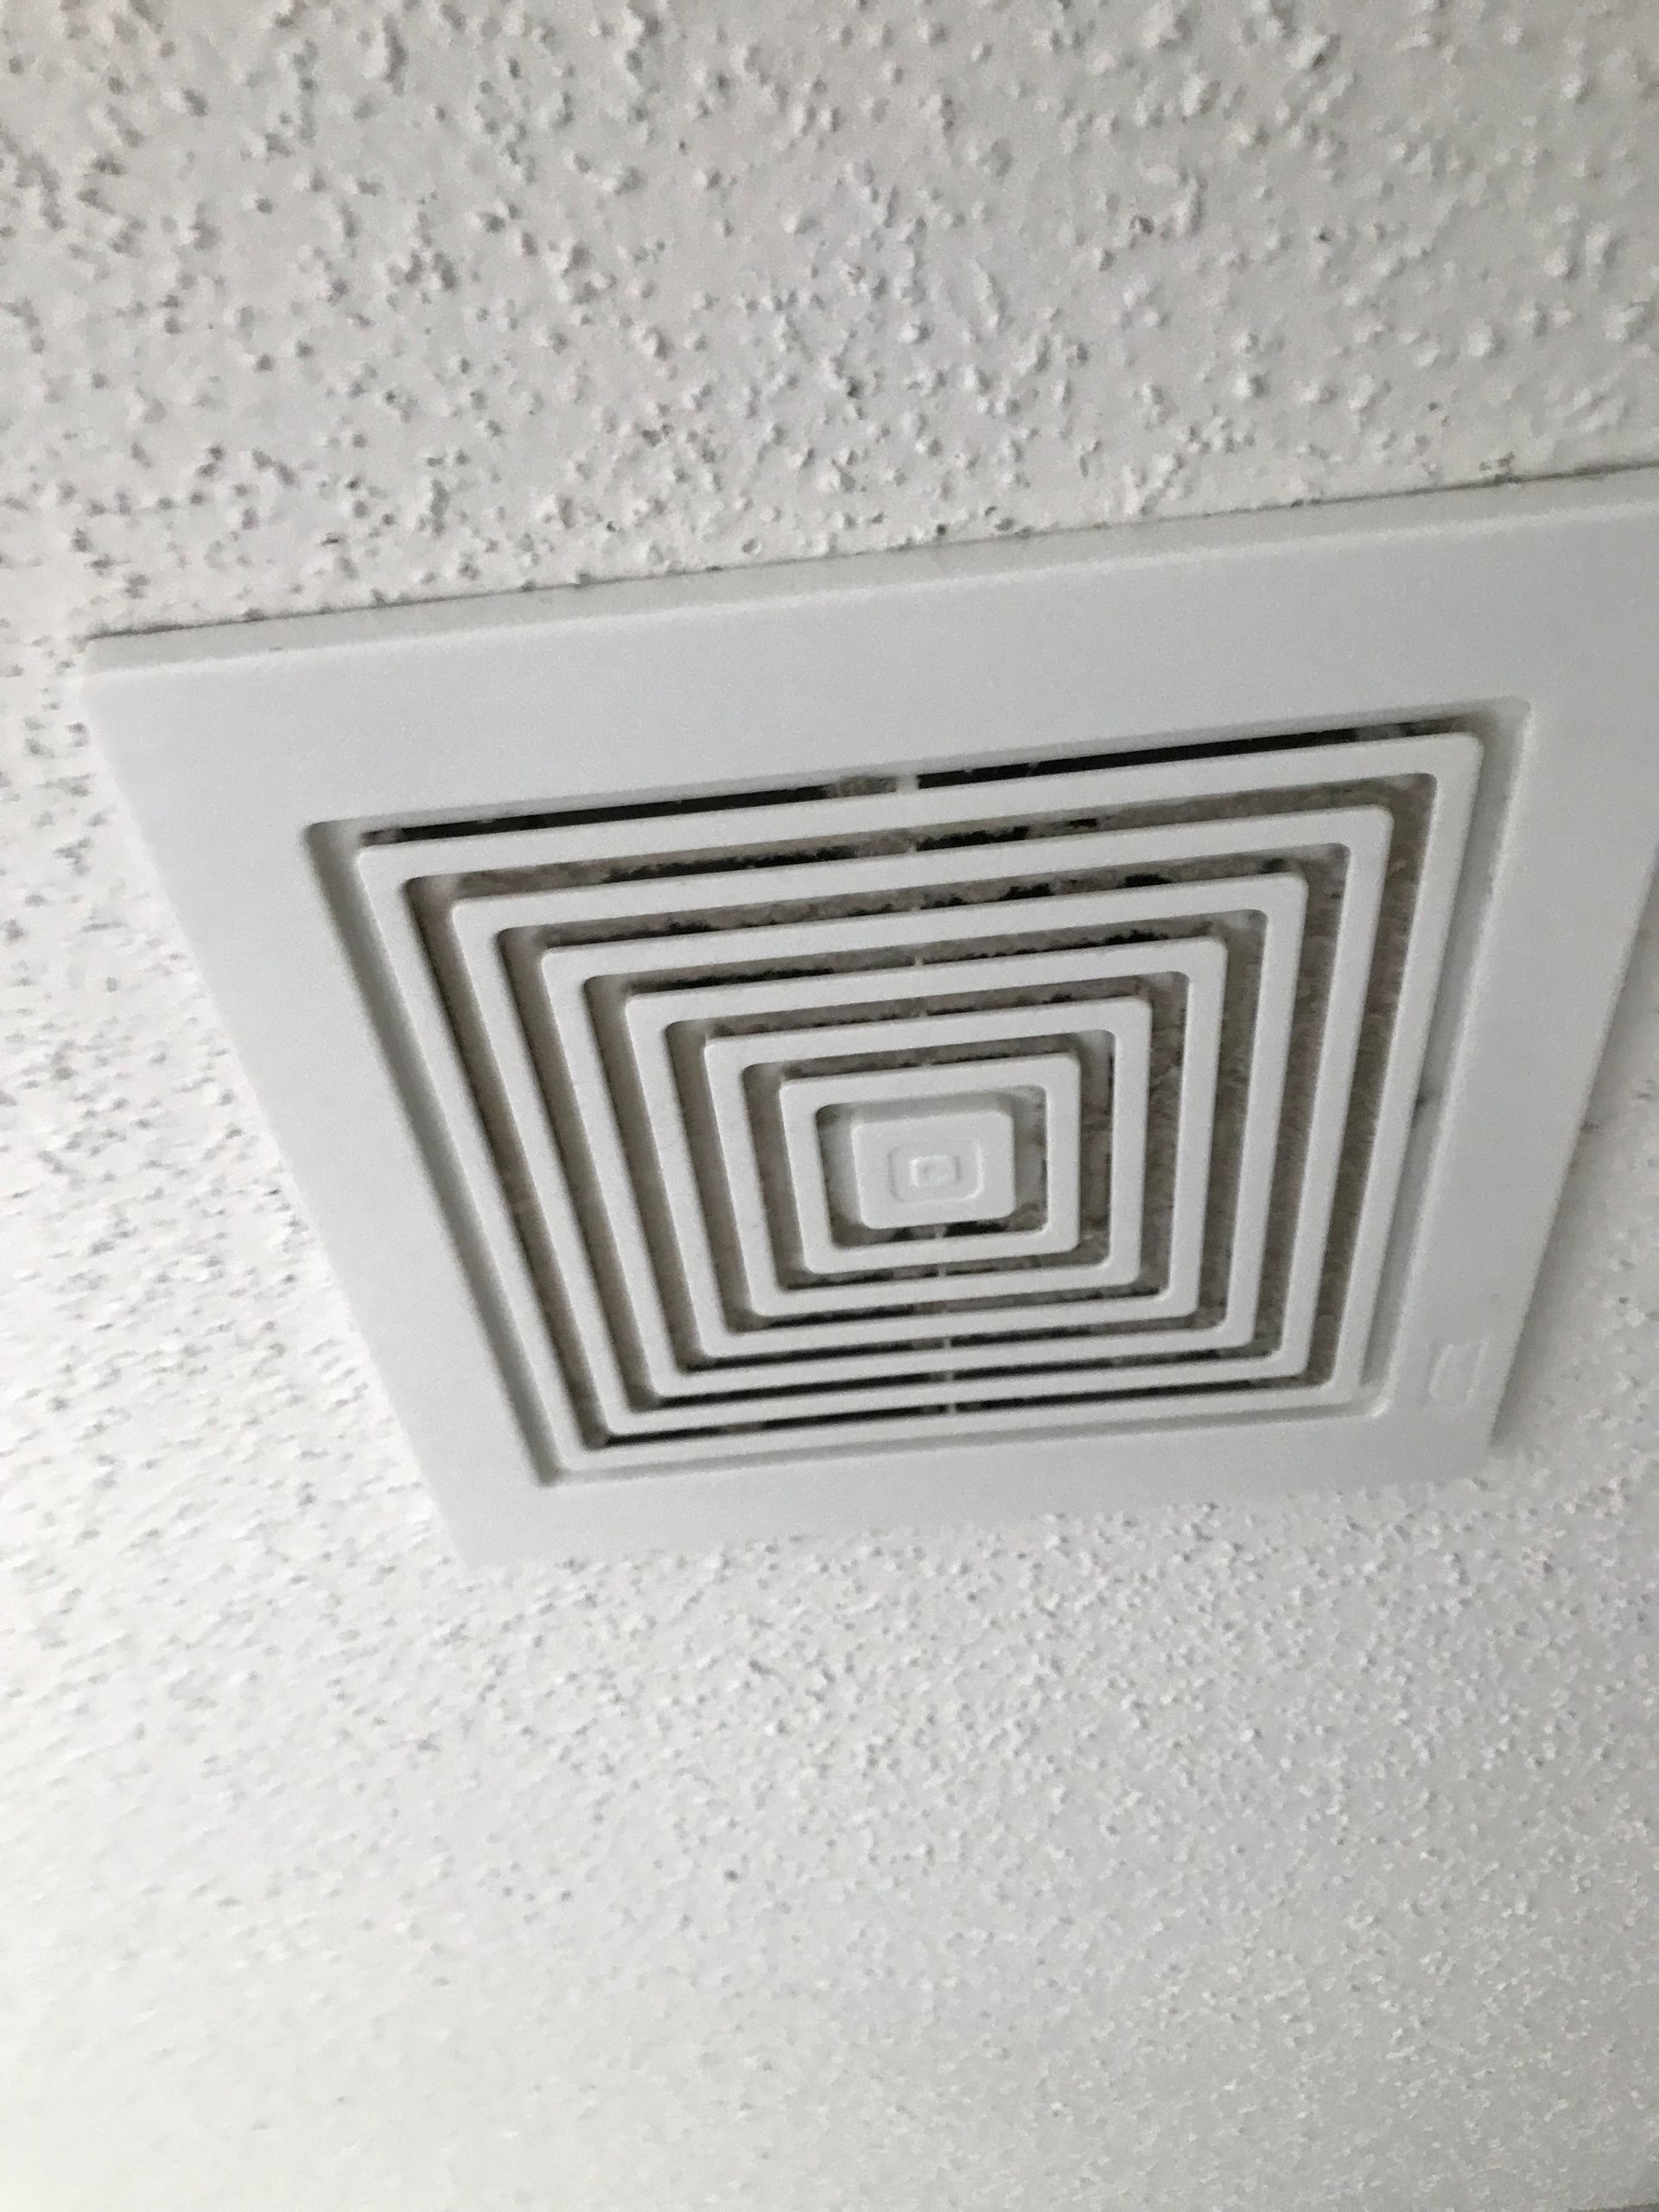 a square air vent is hanging from the ceiling of a room